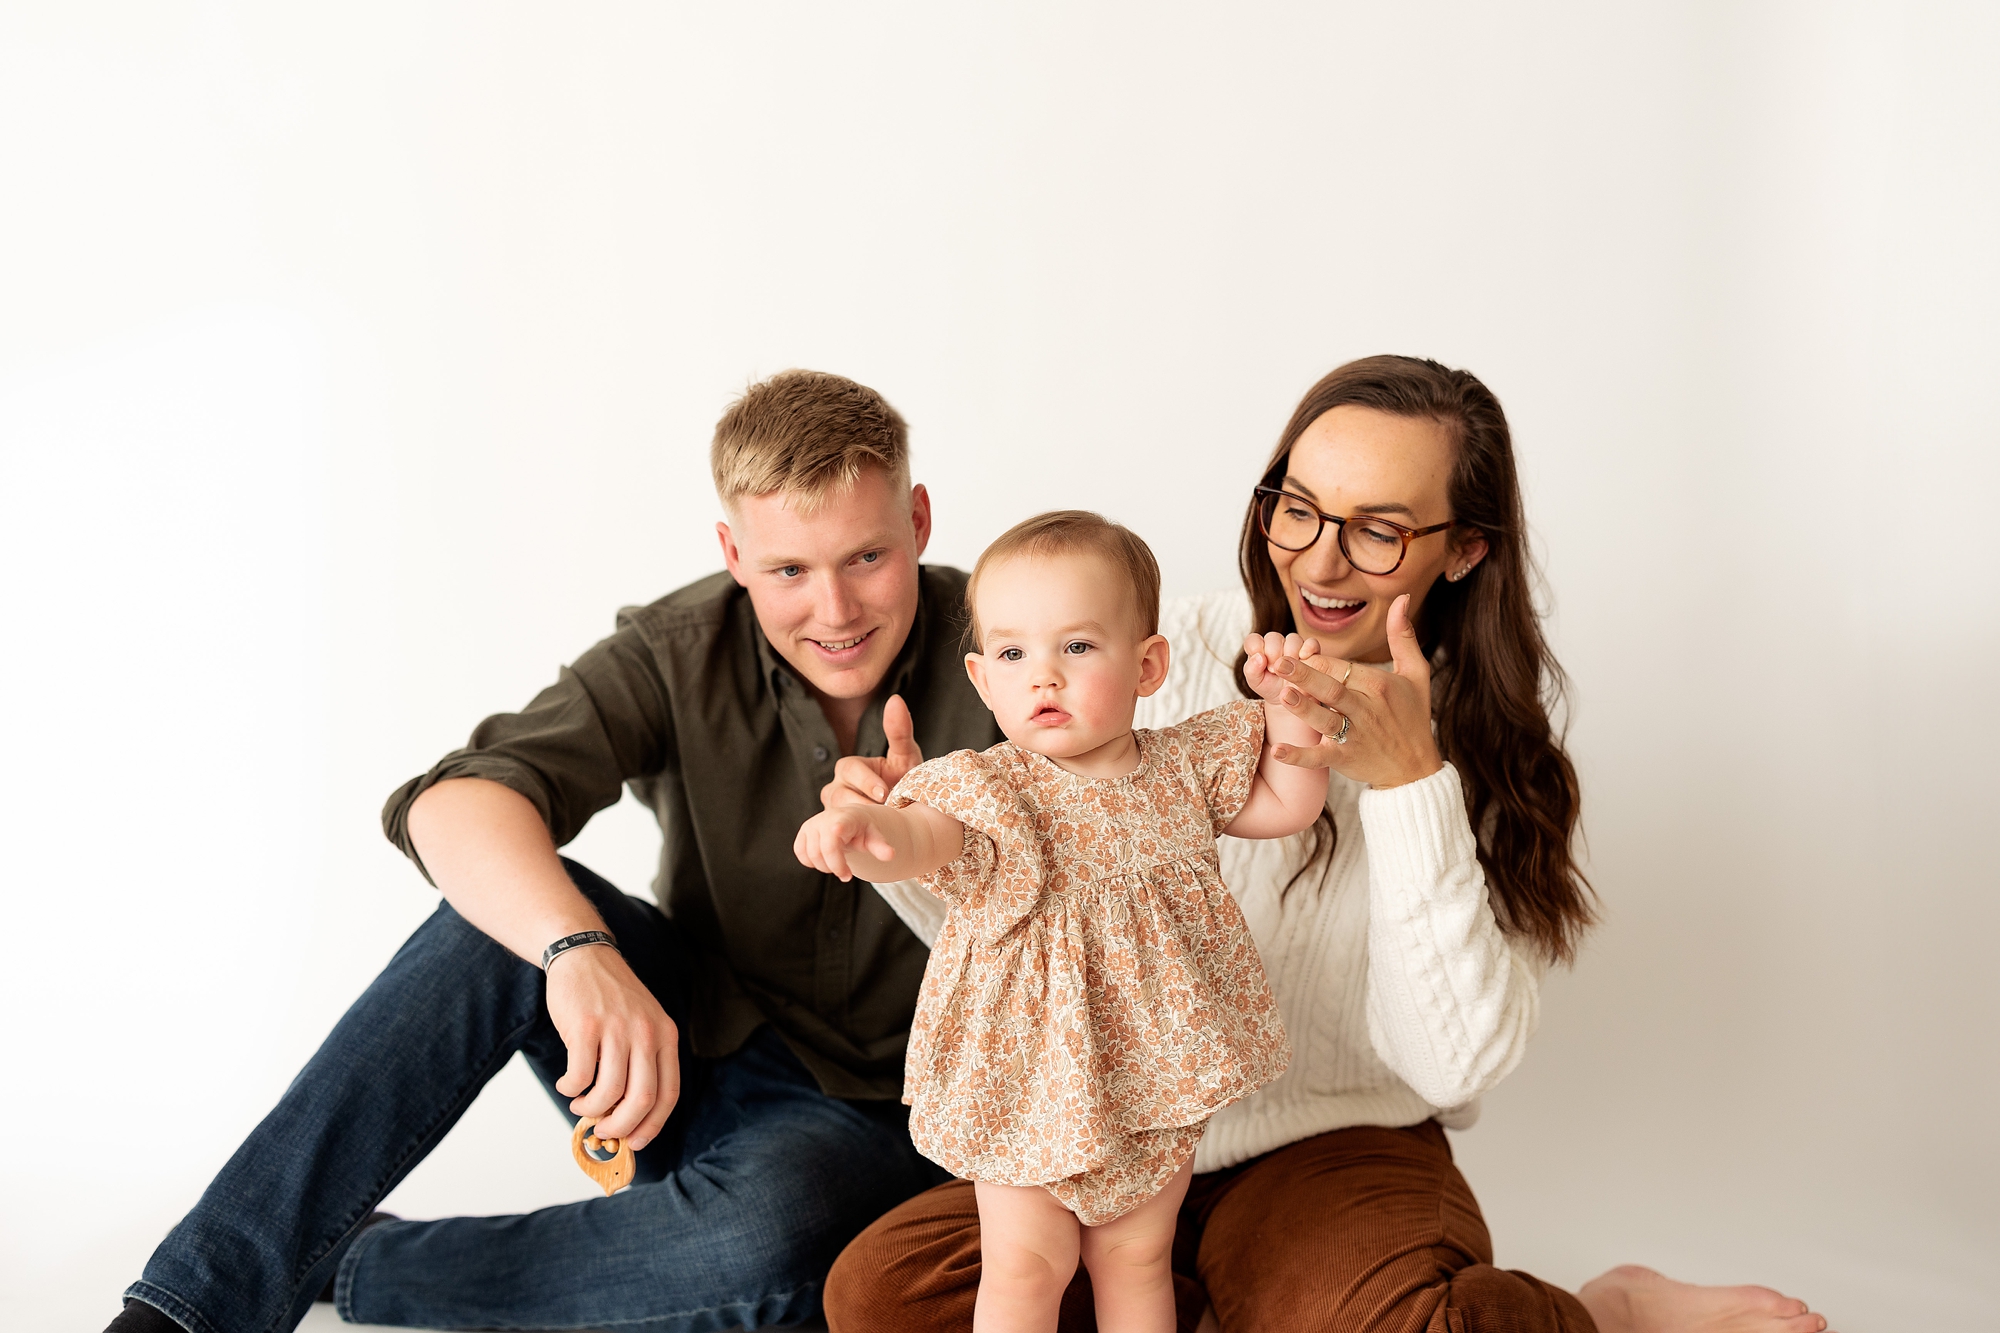 studio photos in Colorado Springs at kindle studio of a baby girl on her first birthday with mom and dad